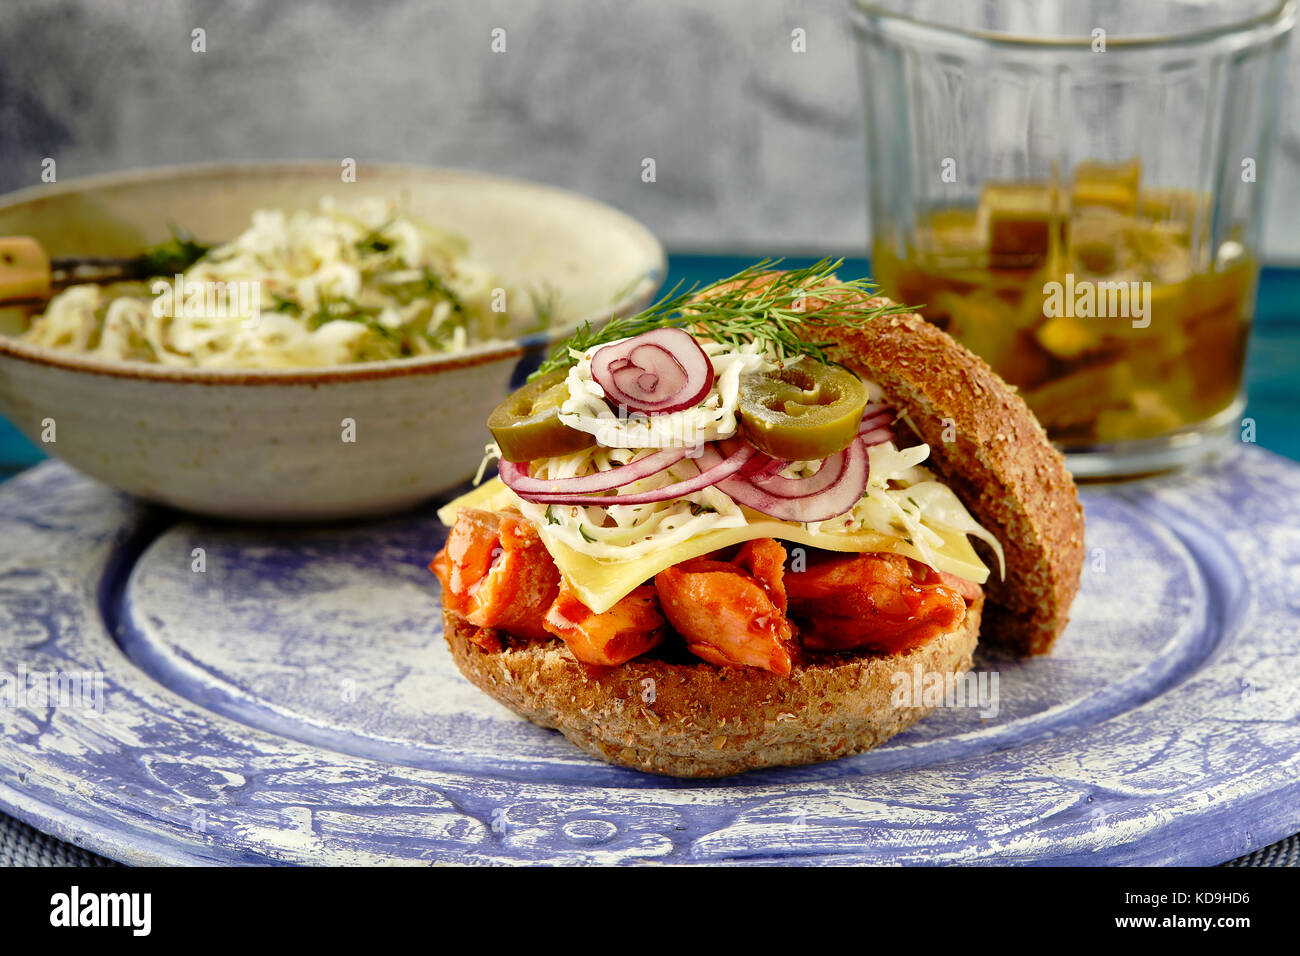 Honey barbecued pulled salmon burger Stock Photo